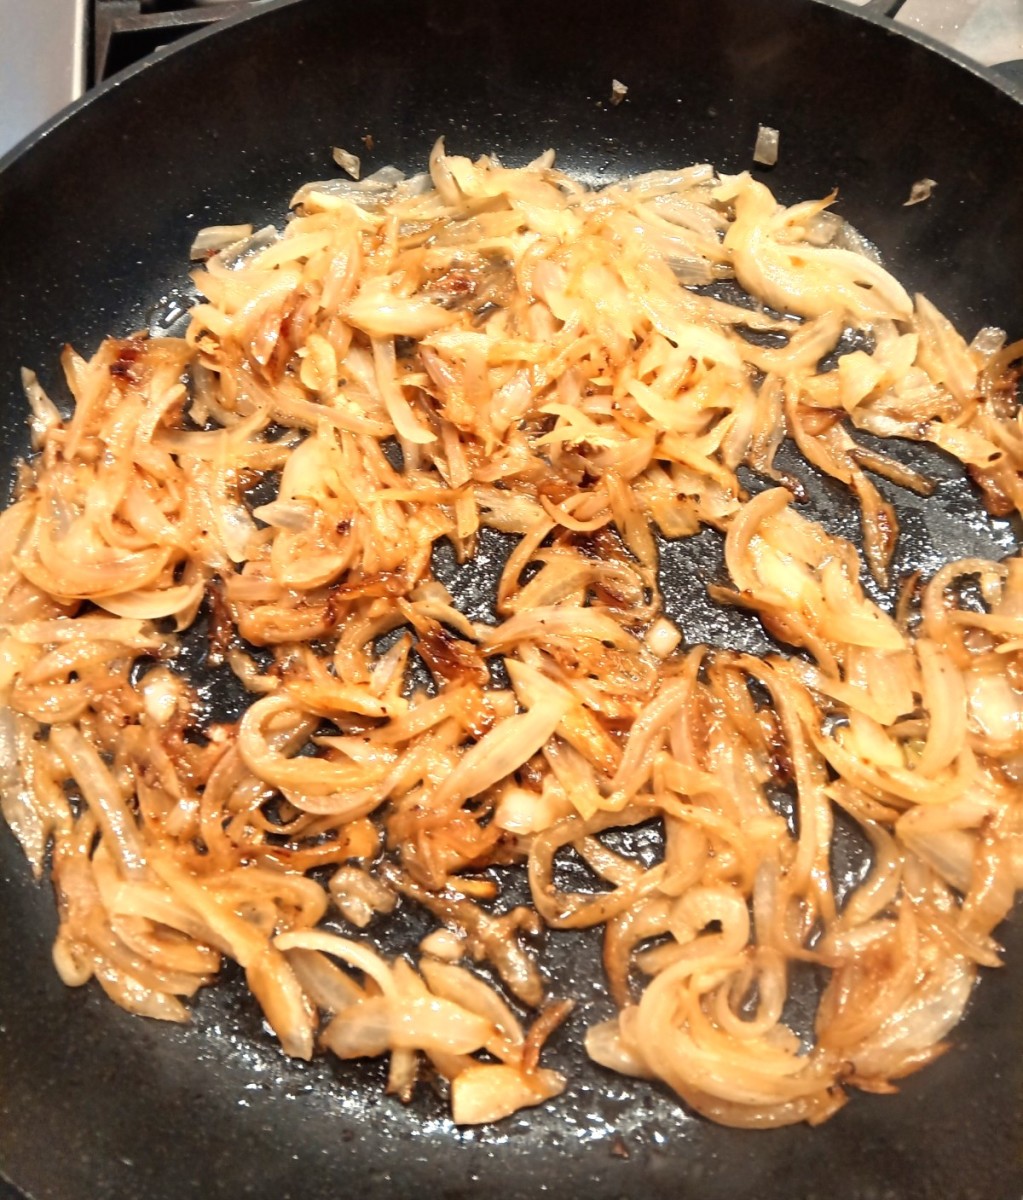 Golden brown cooked onions